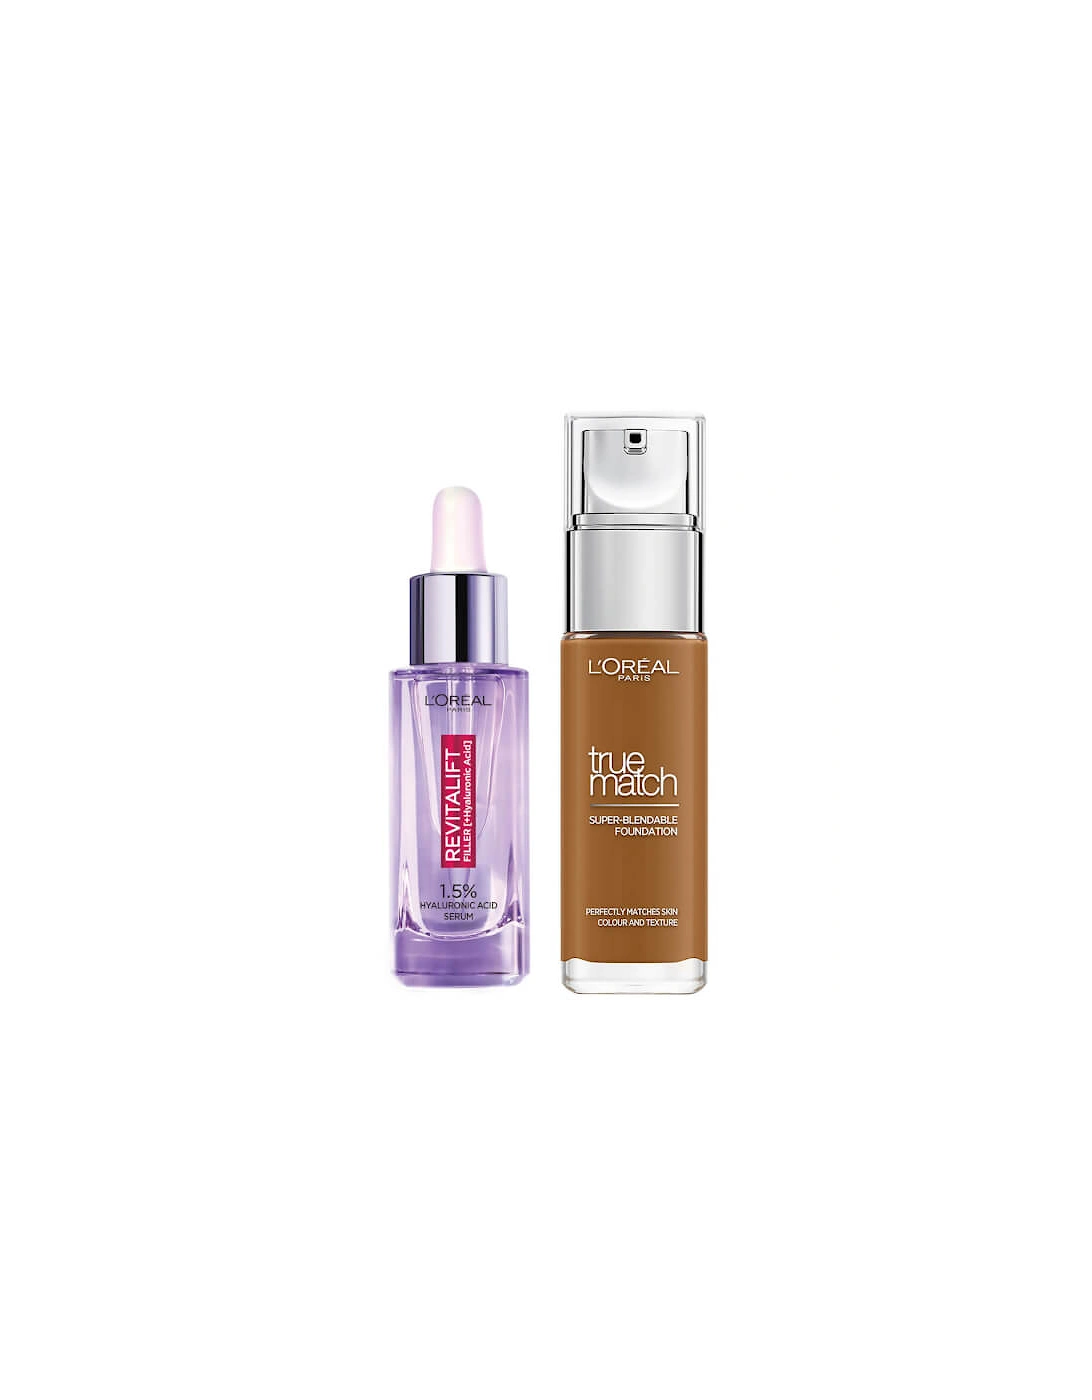 L’Oreal Paris Hyaluronic Acid Filler Serum and True Match Hyaluronic Acid Foundation Duo - 5N Sand, 2 of 1